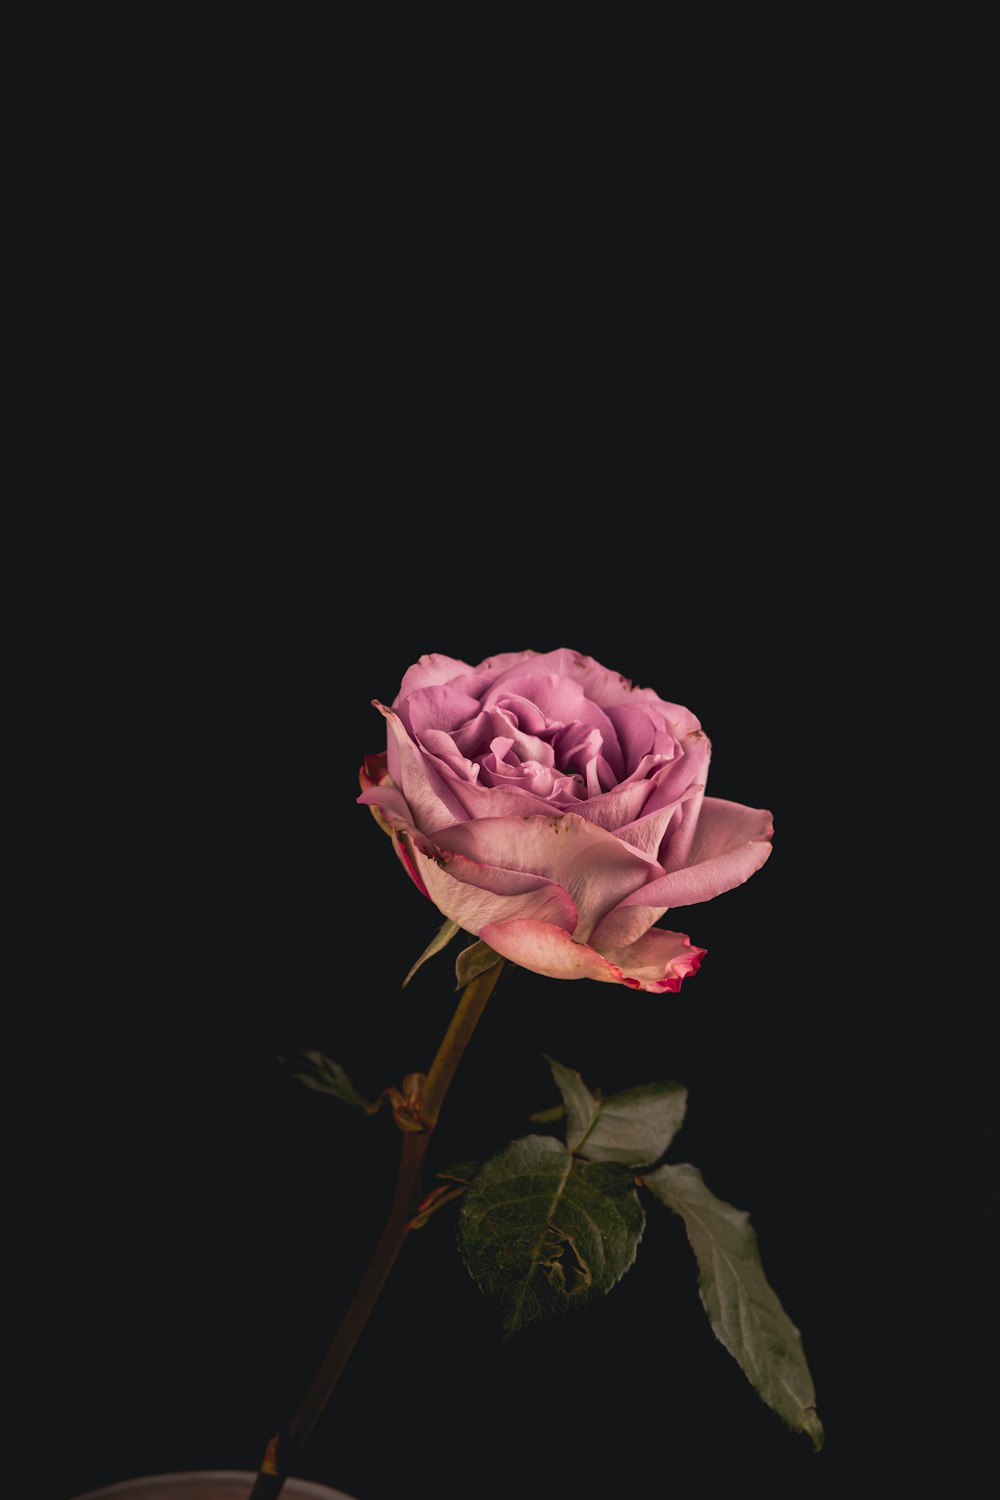 A Single Pink Rose Sitting In A Vase Photo – Free Norway Image On Unsplash